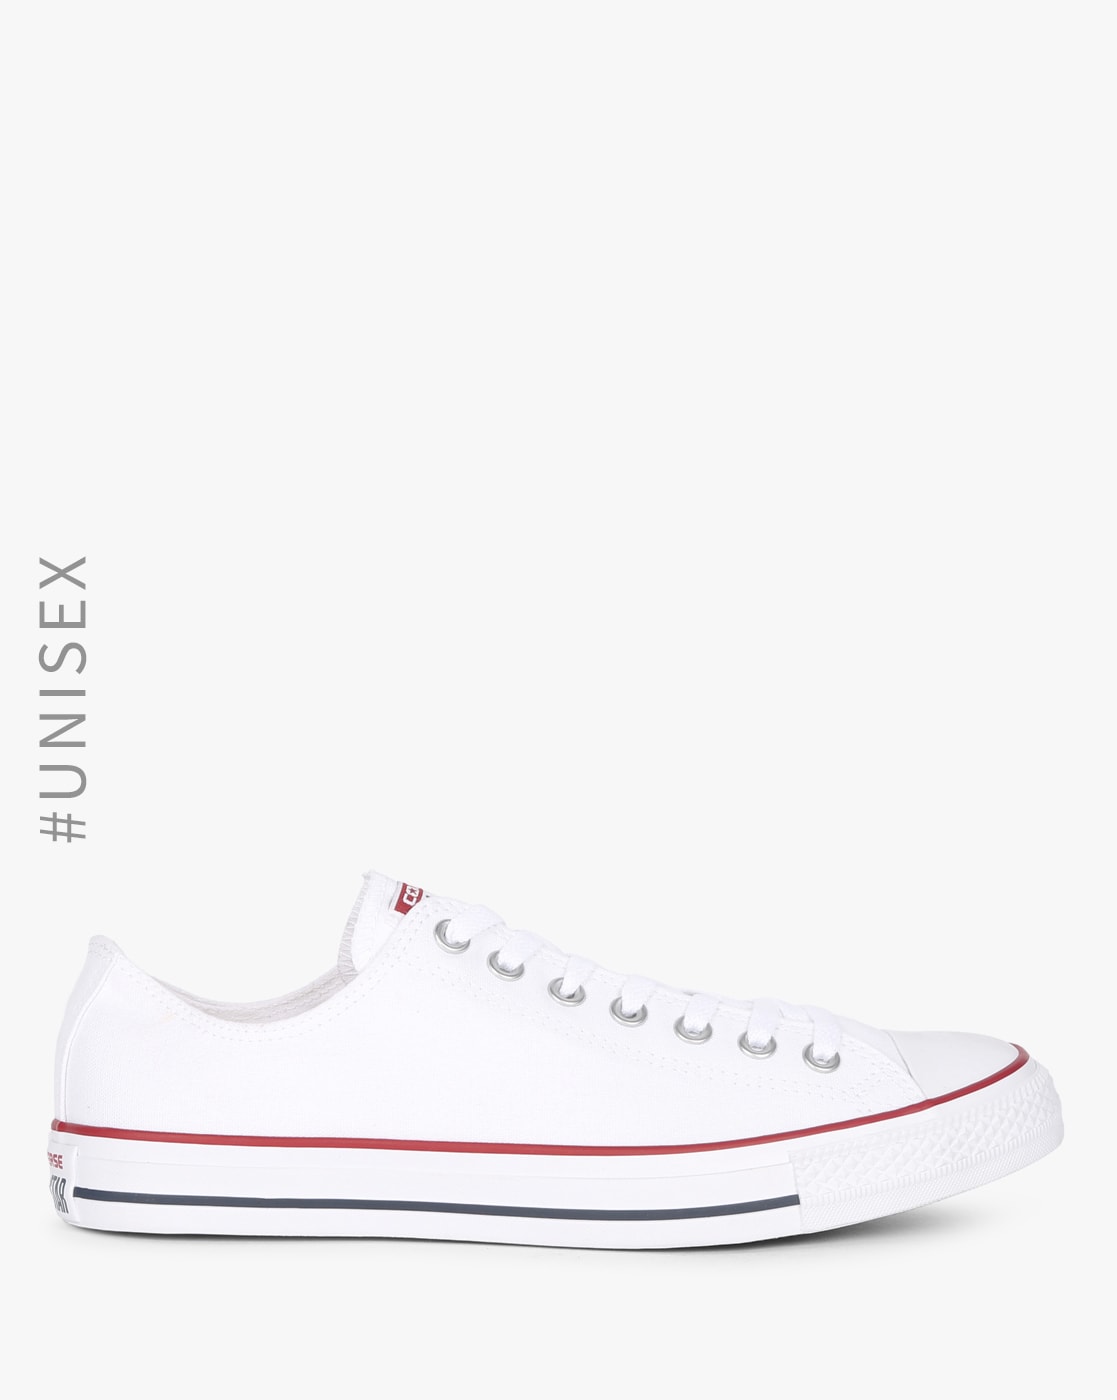 converse slippers online india Cheaper 